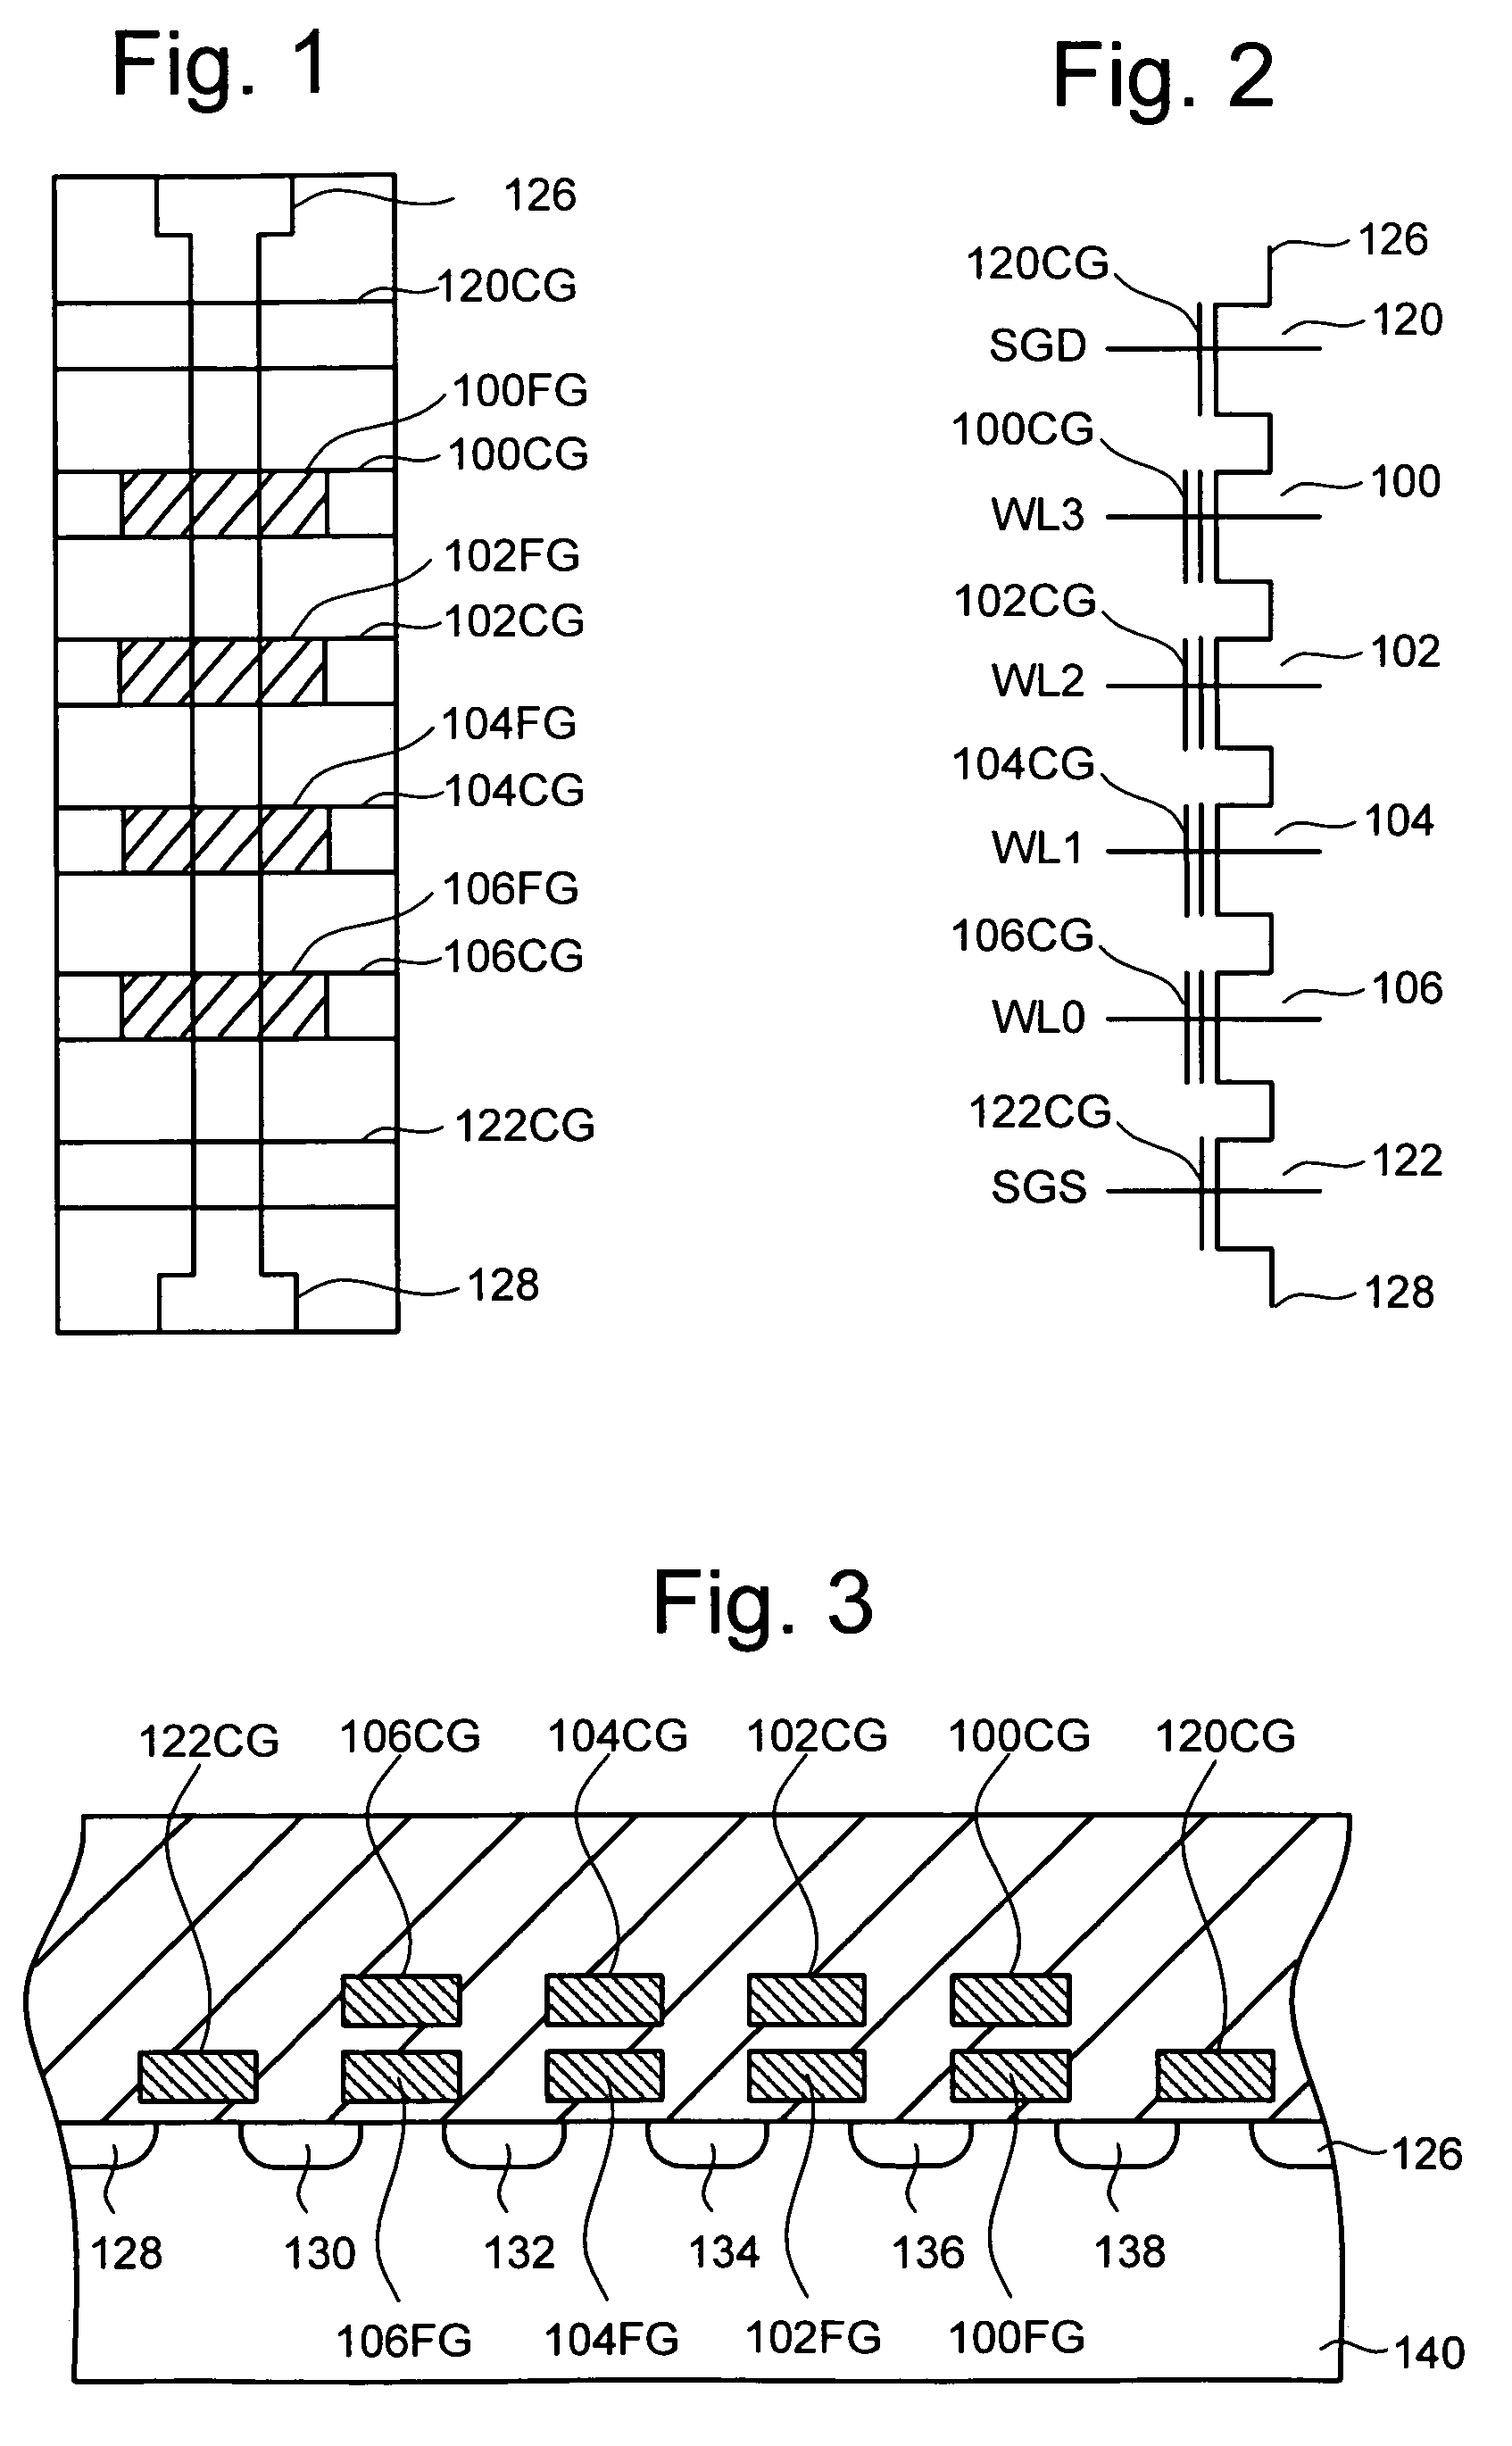 Reverse coupling effect with timing information for non-volatile memory